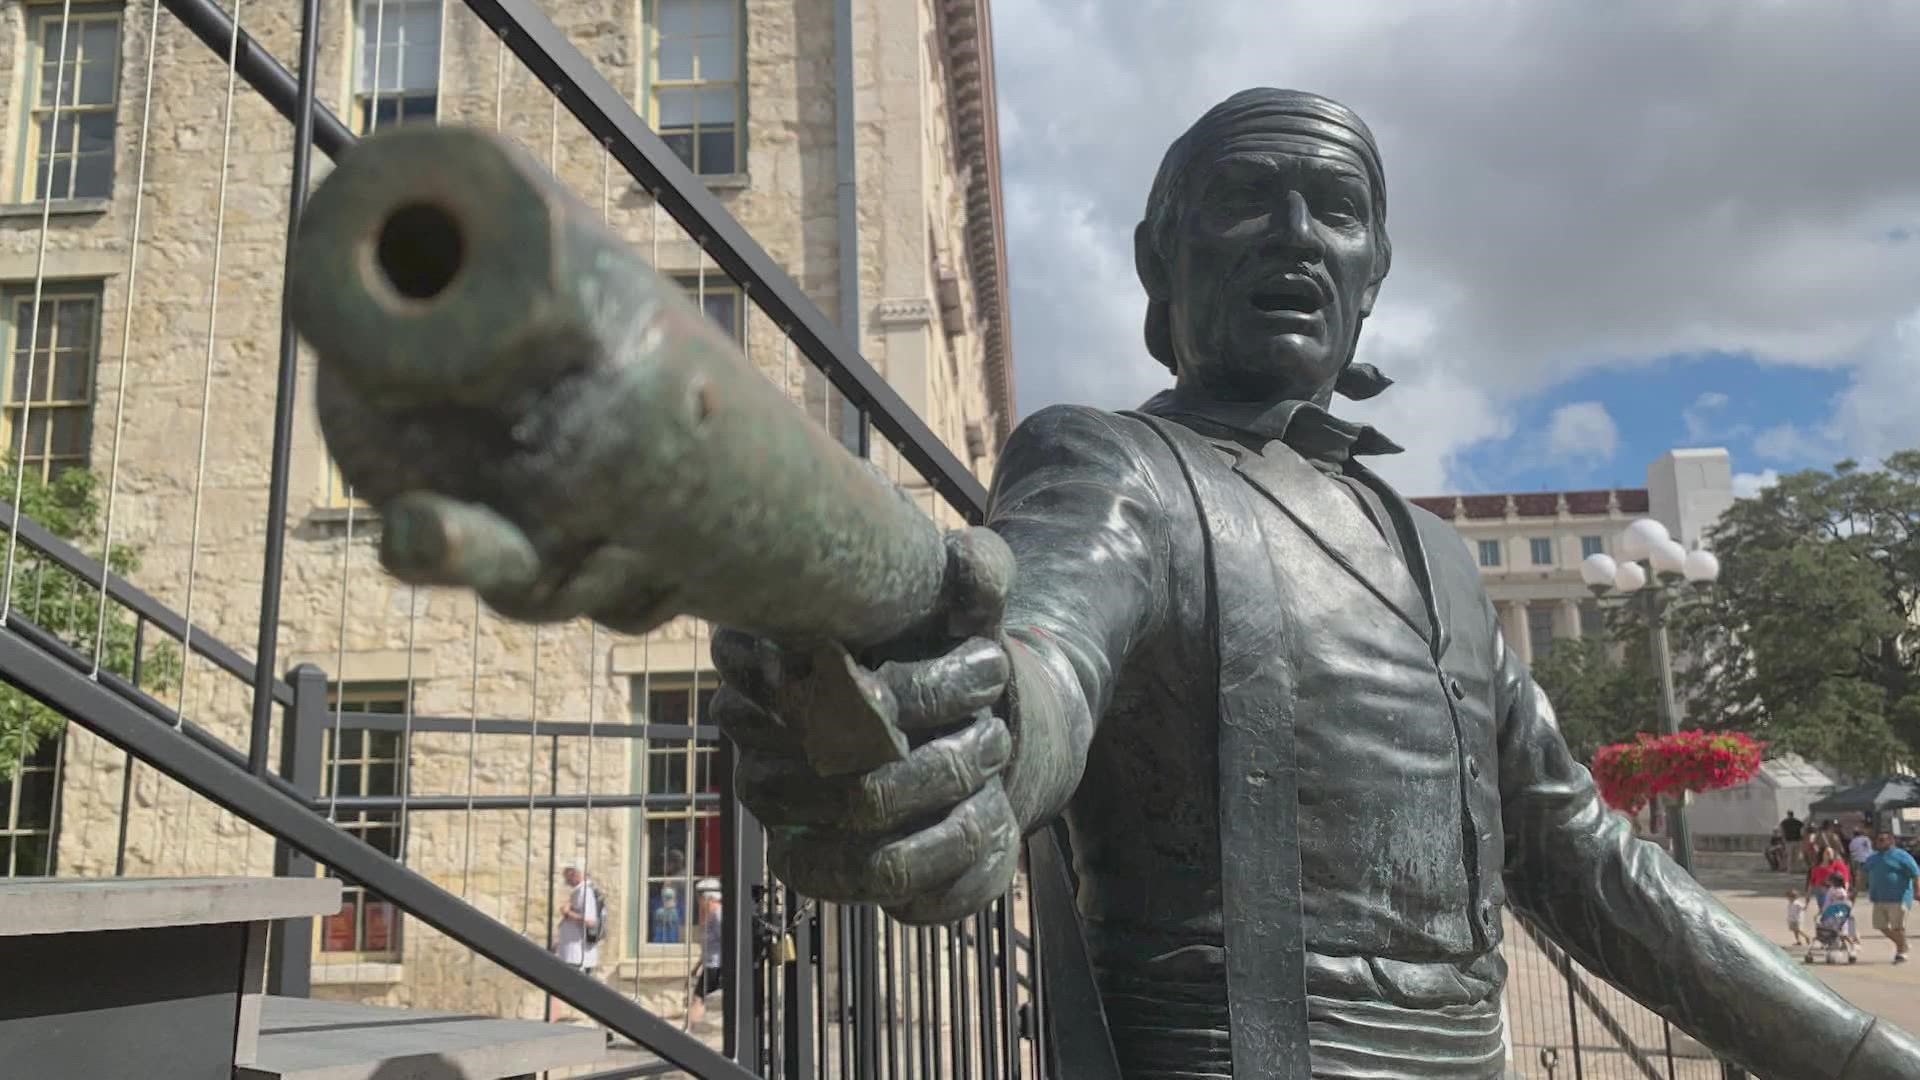 Toribio Losoya was born and raised at the Alamo, and died defending it. His descendants are sharing his story with pride and gratitude.